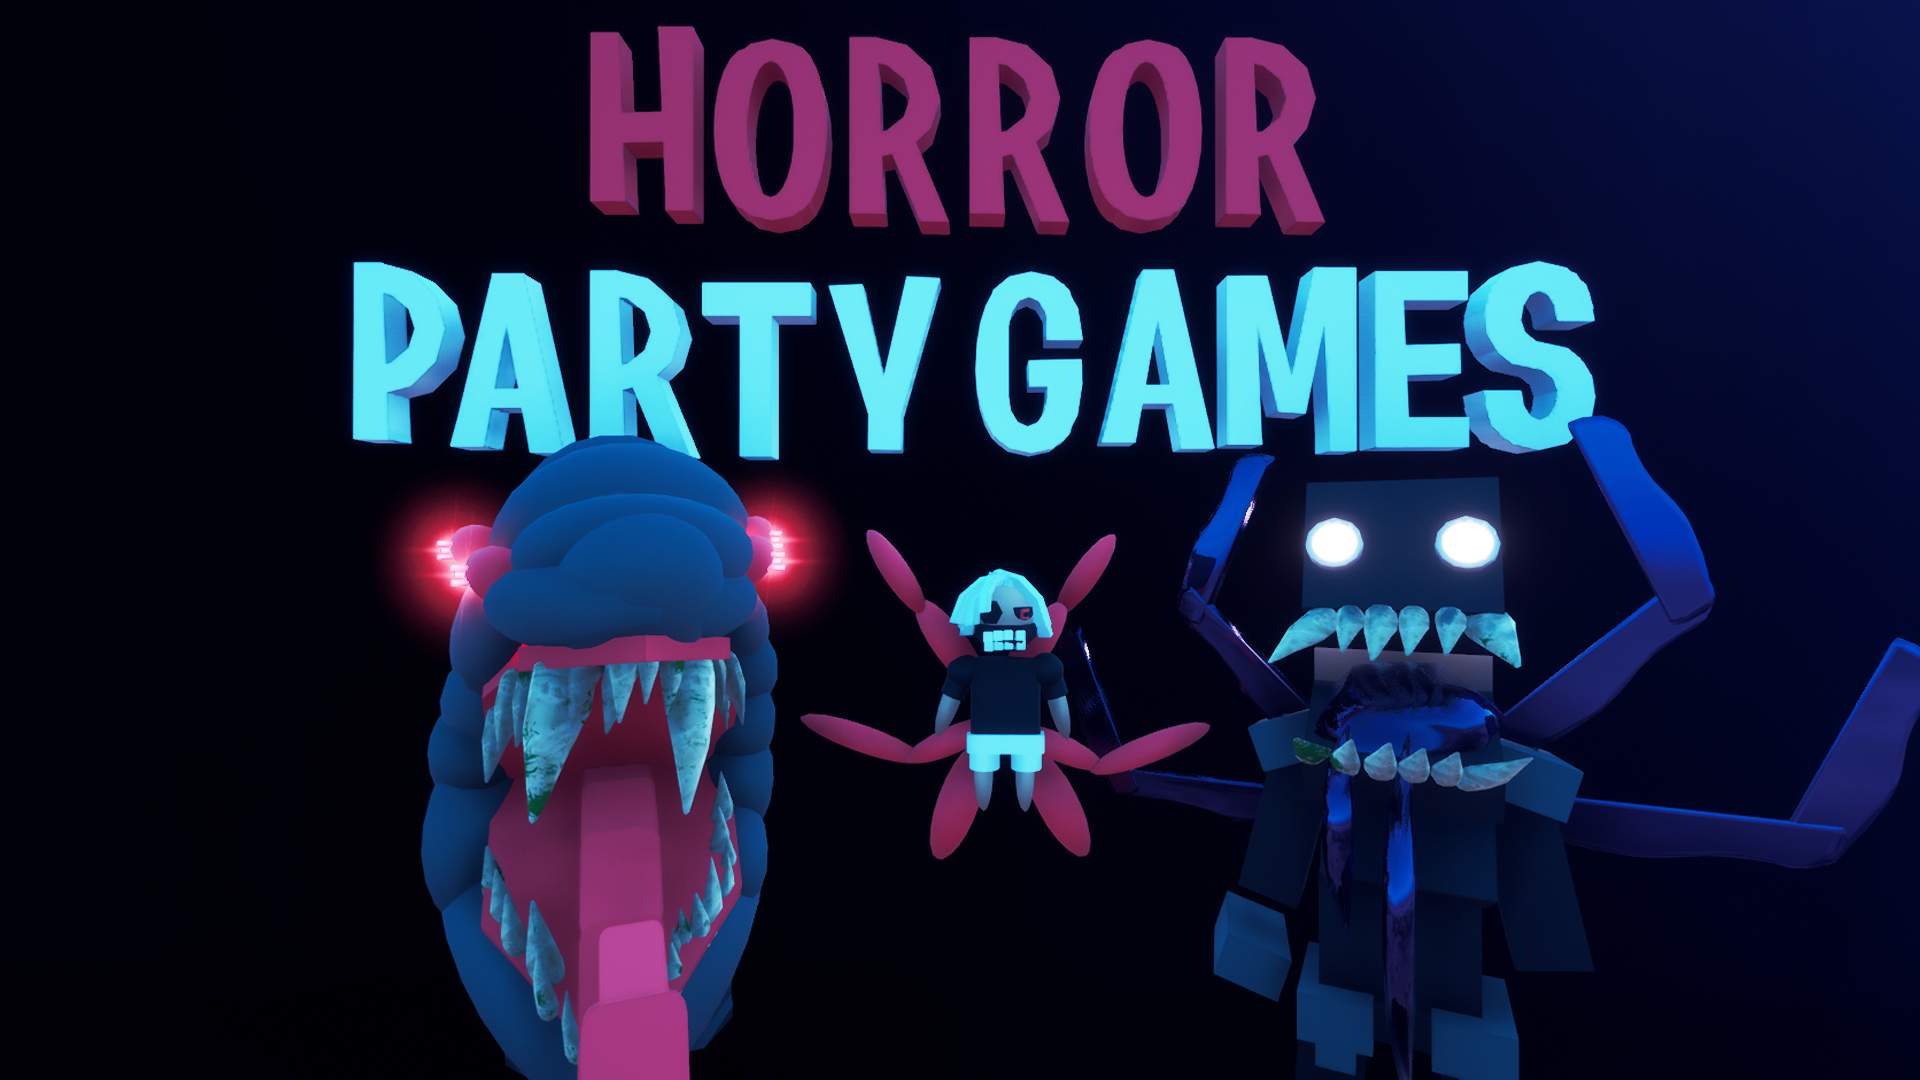 HORROR PARTY GAMES